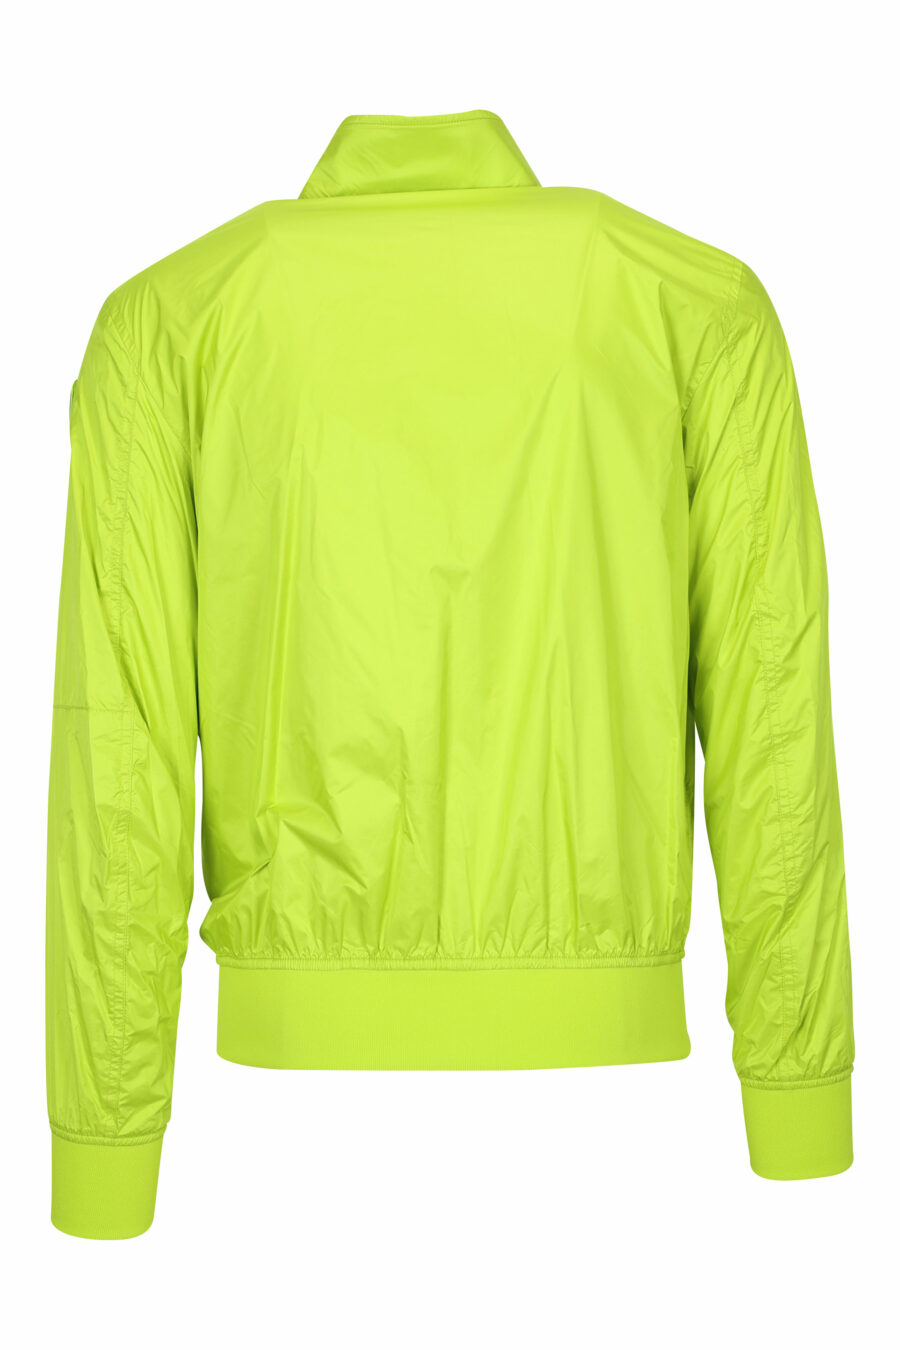 Yellow jacket with side zip and logo - 8058610765828 1